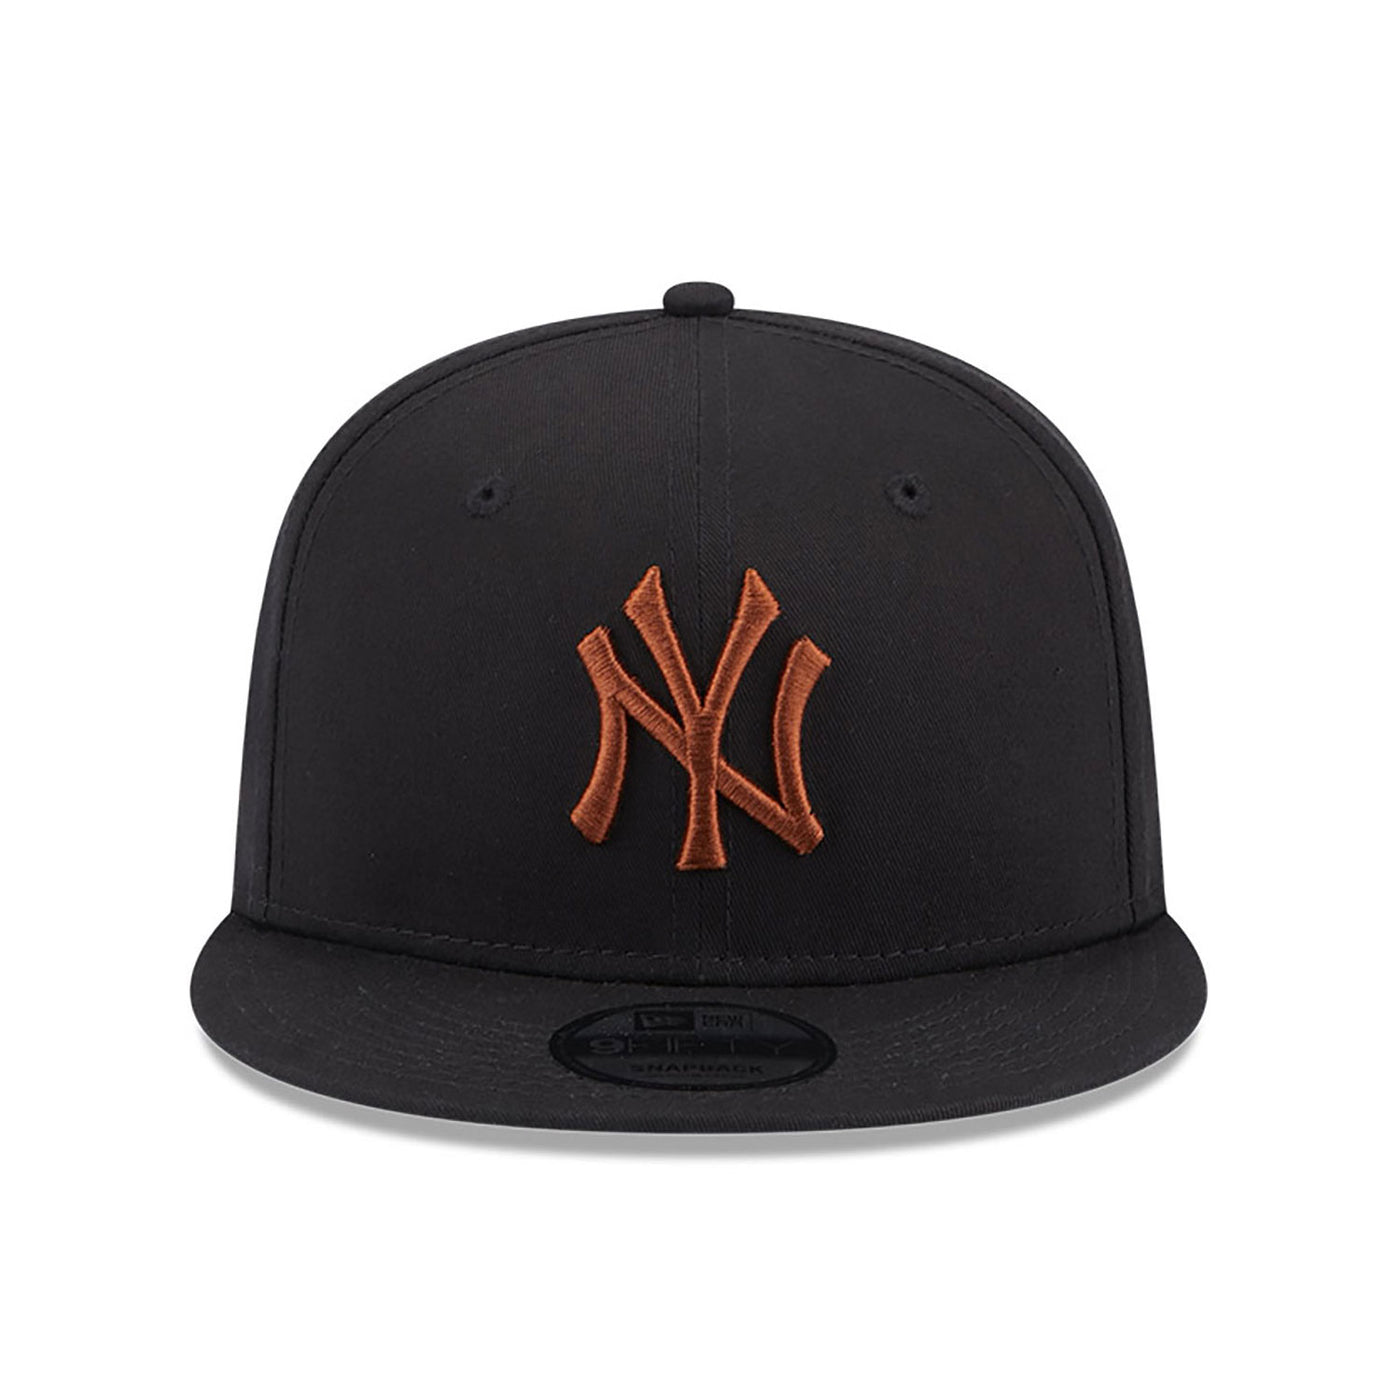 New Era League Essential 9Fifty NY Yankees black/brown